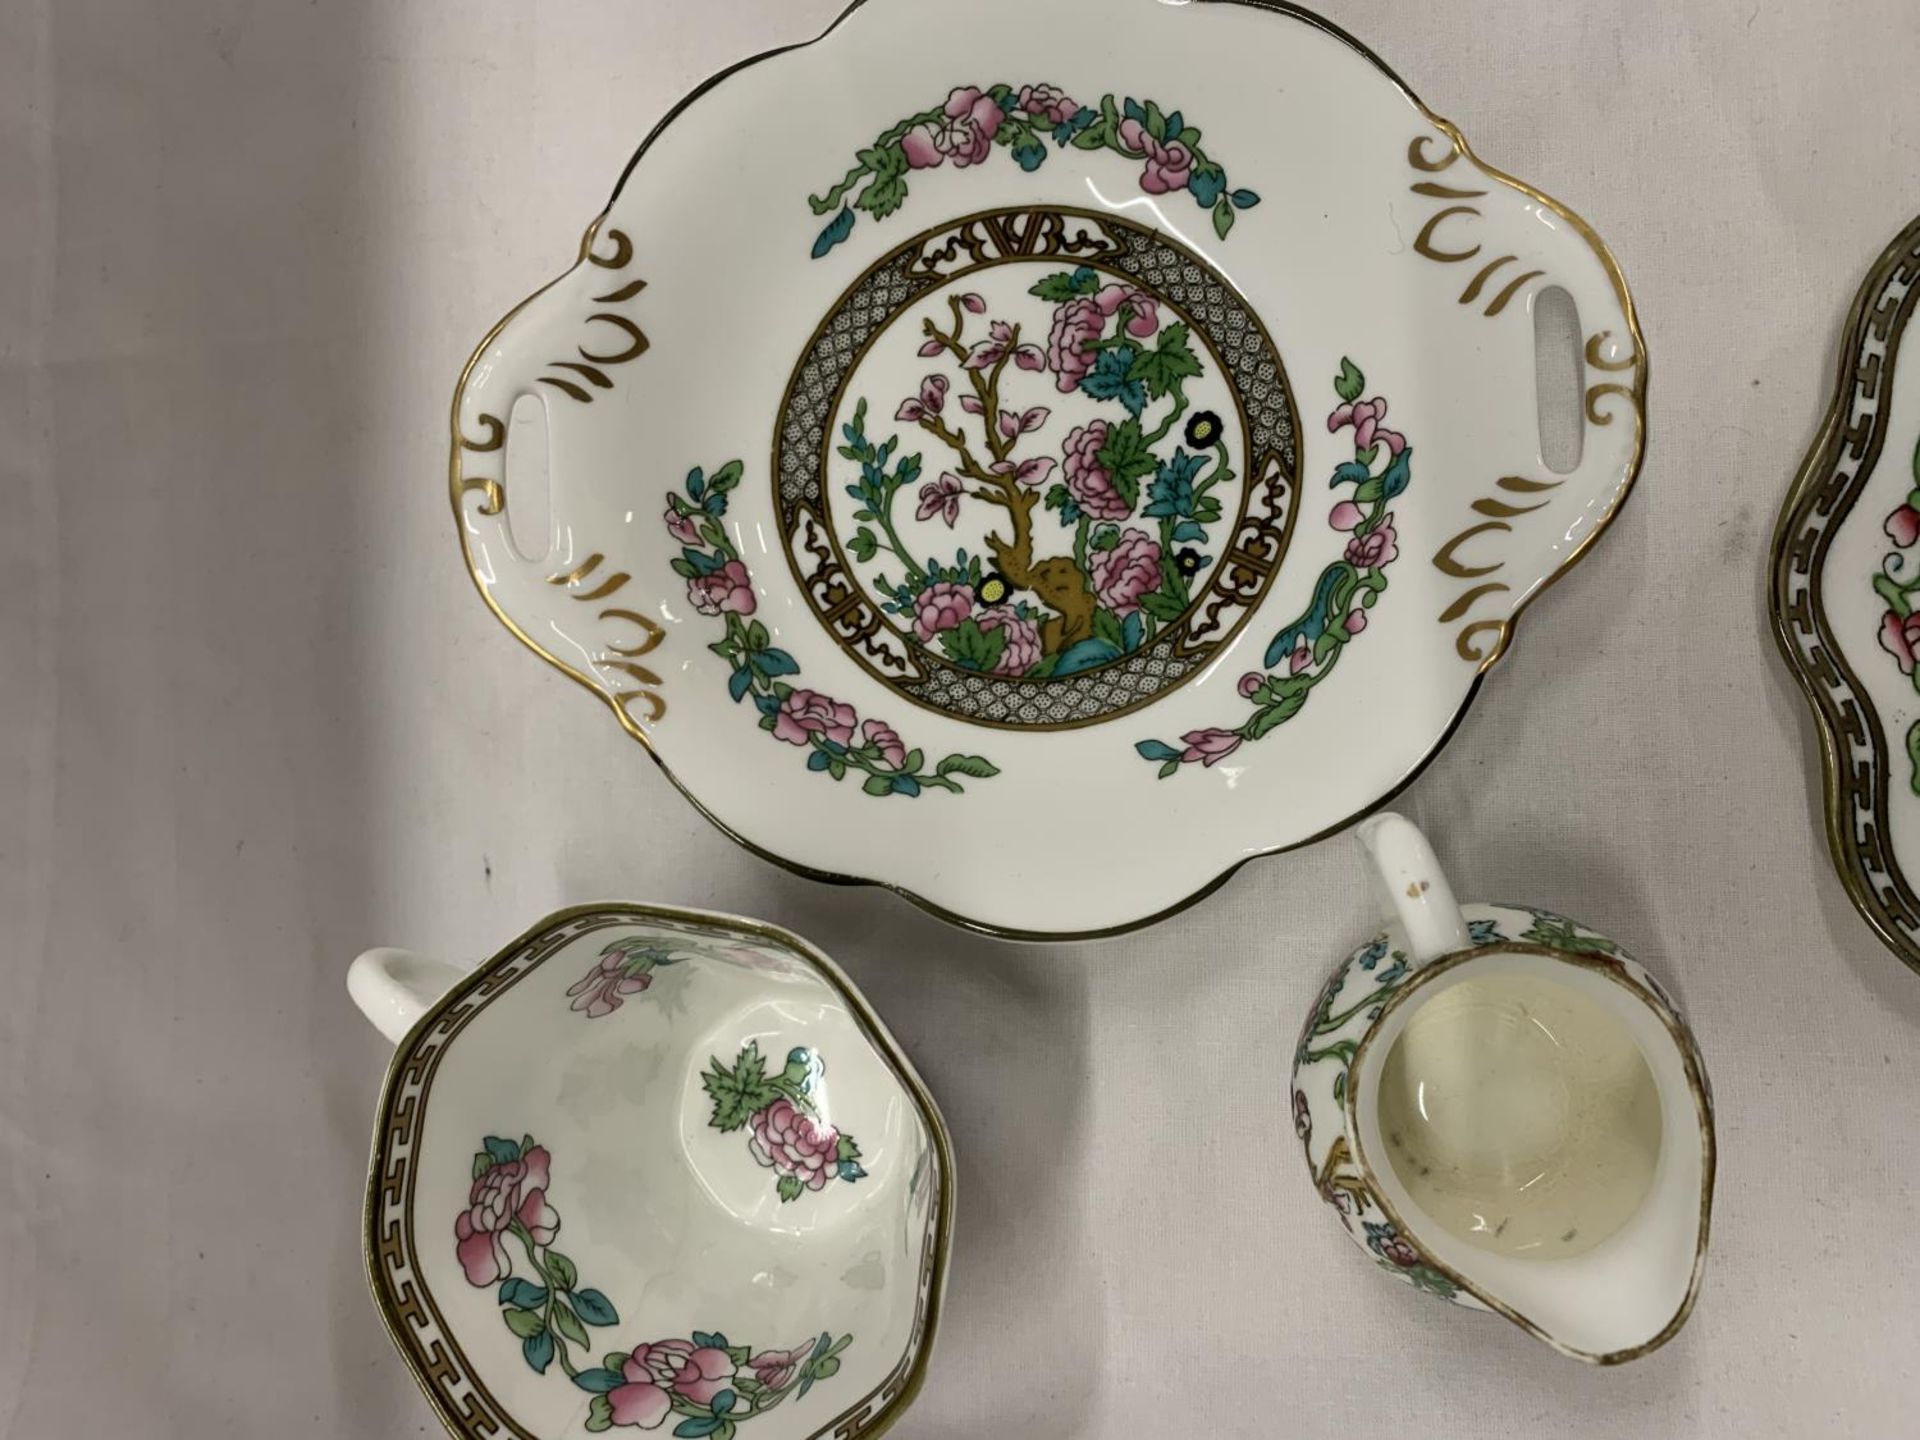 SEVEN PIECES OF COALPORT 'INDIAN TREE' DESIGN TO INCLUDE PLATES, A CUP AND CREAM JUG - Image 3 of 5